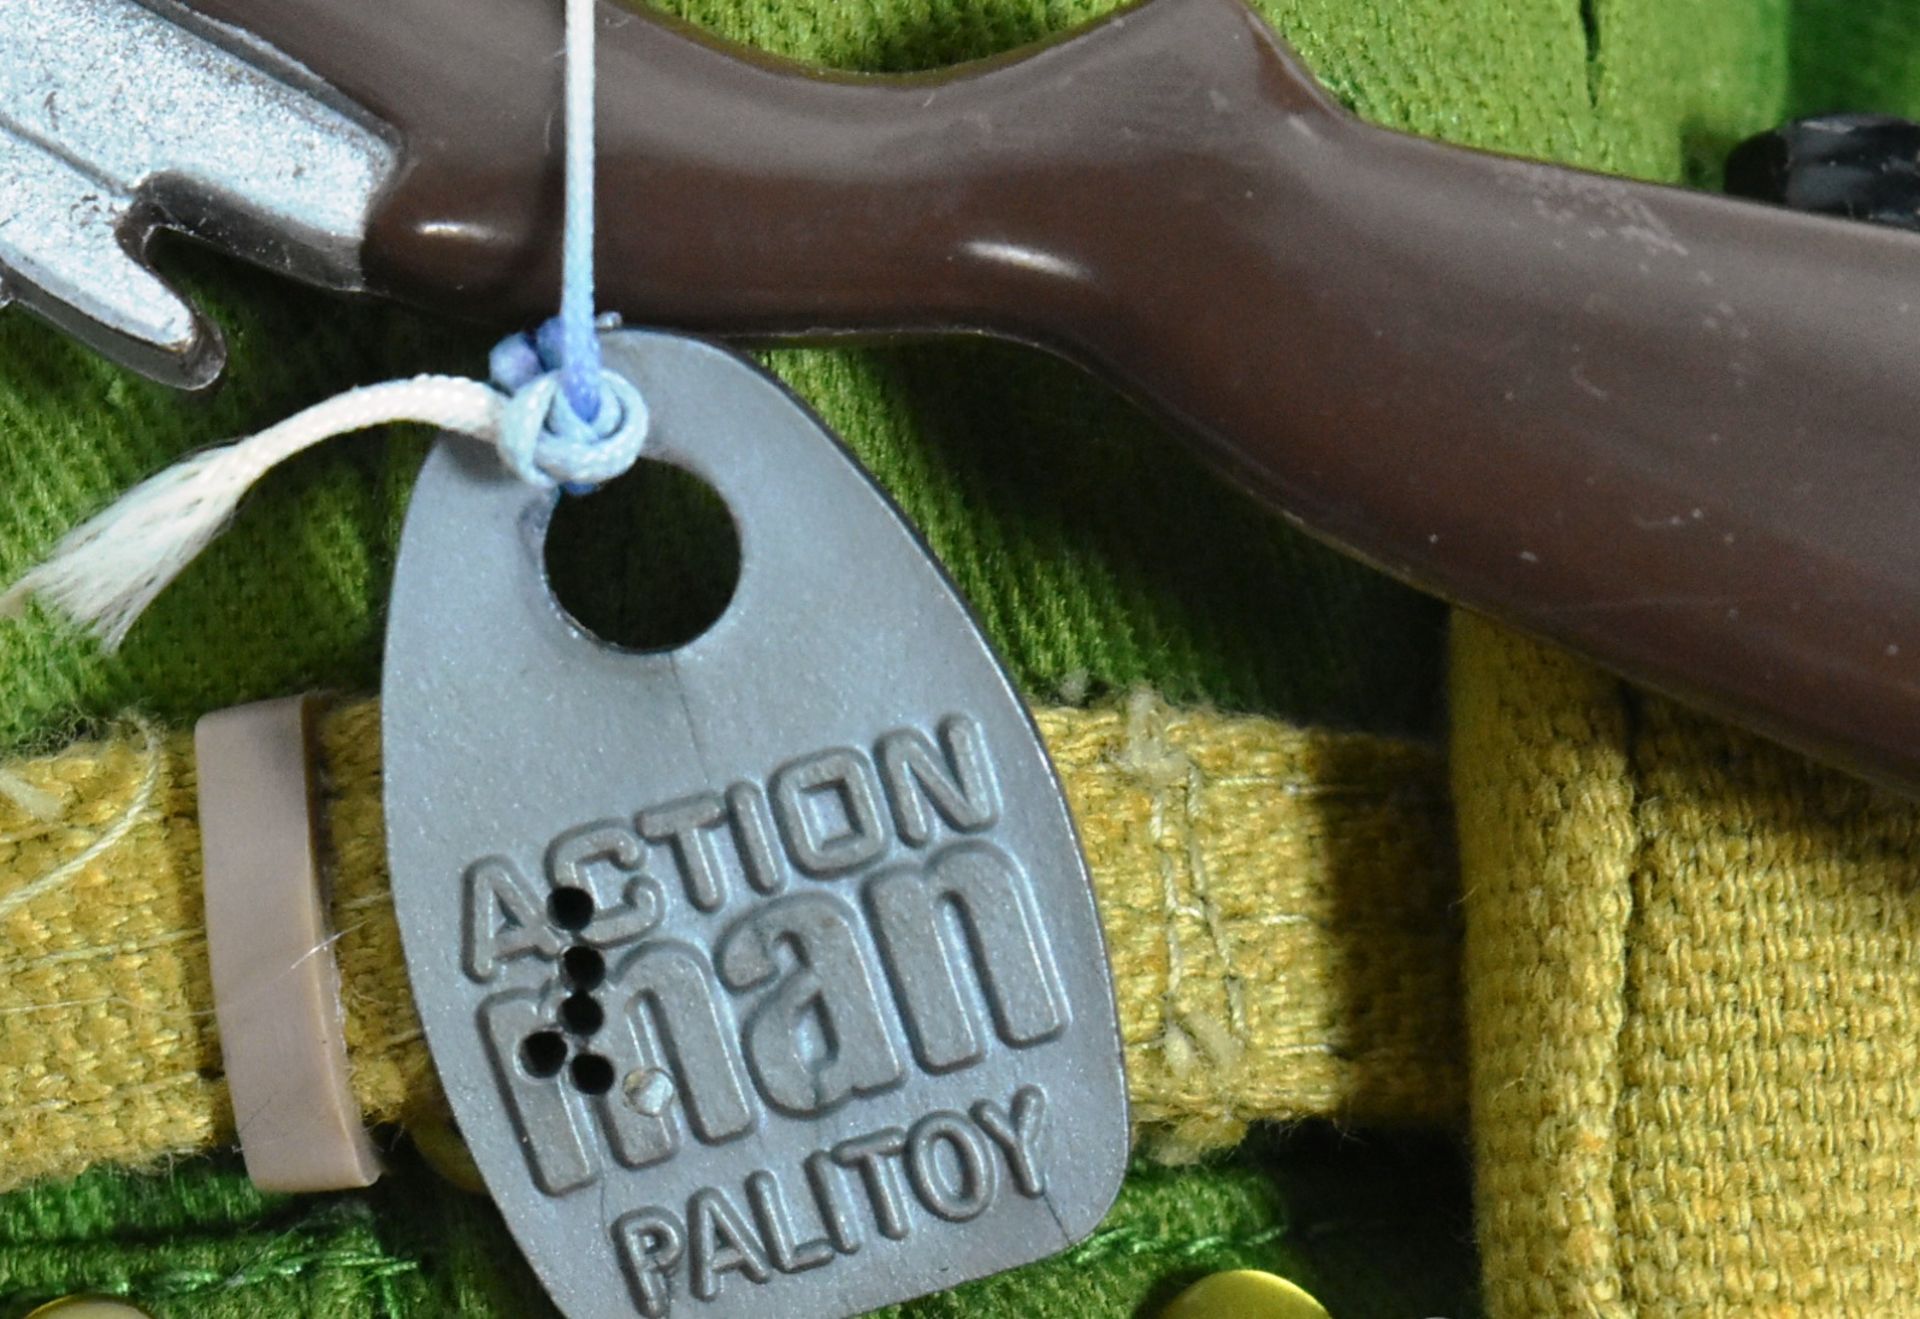 ACTION MAN - VINTAGE PALITOY TALKING COMMANDER ACTION FIGURE - Image 5 of 5